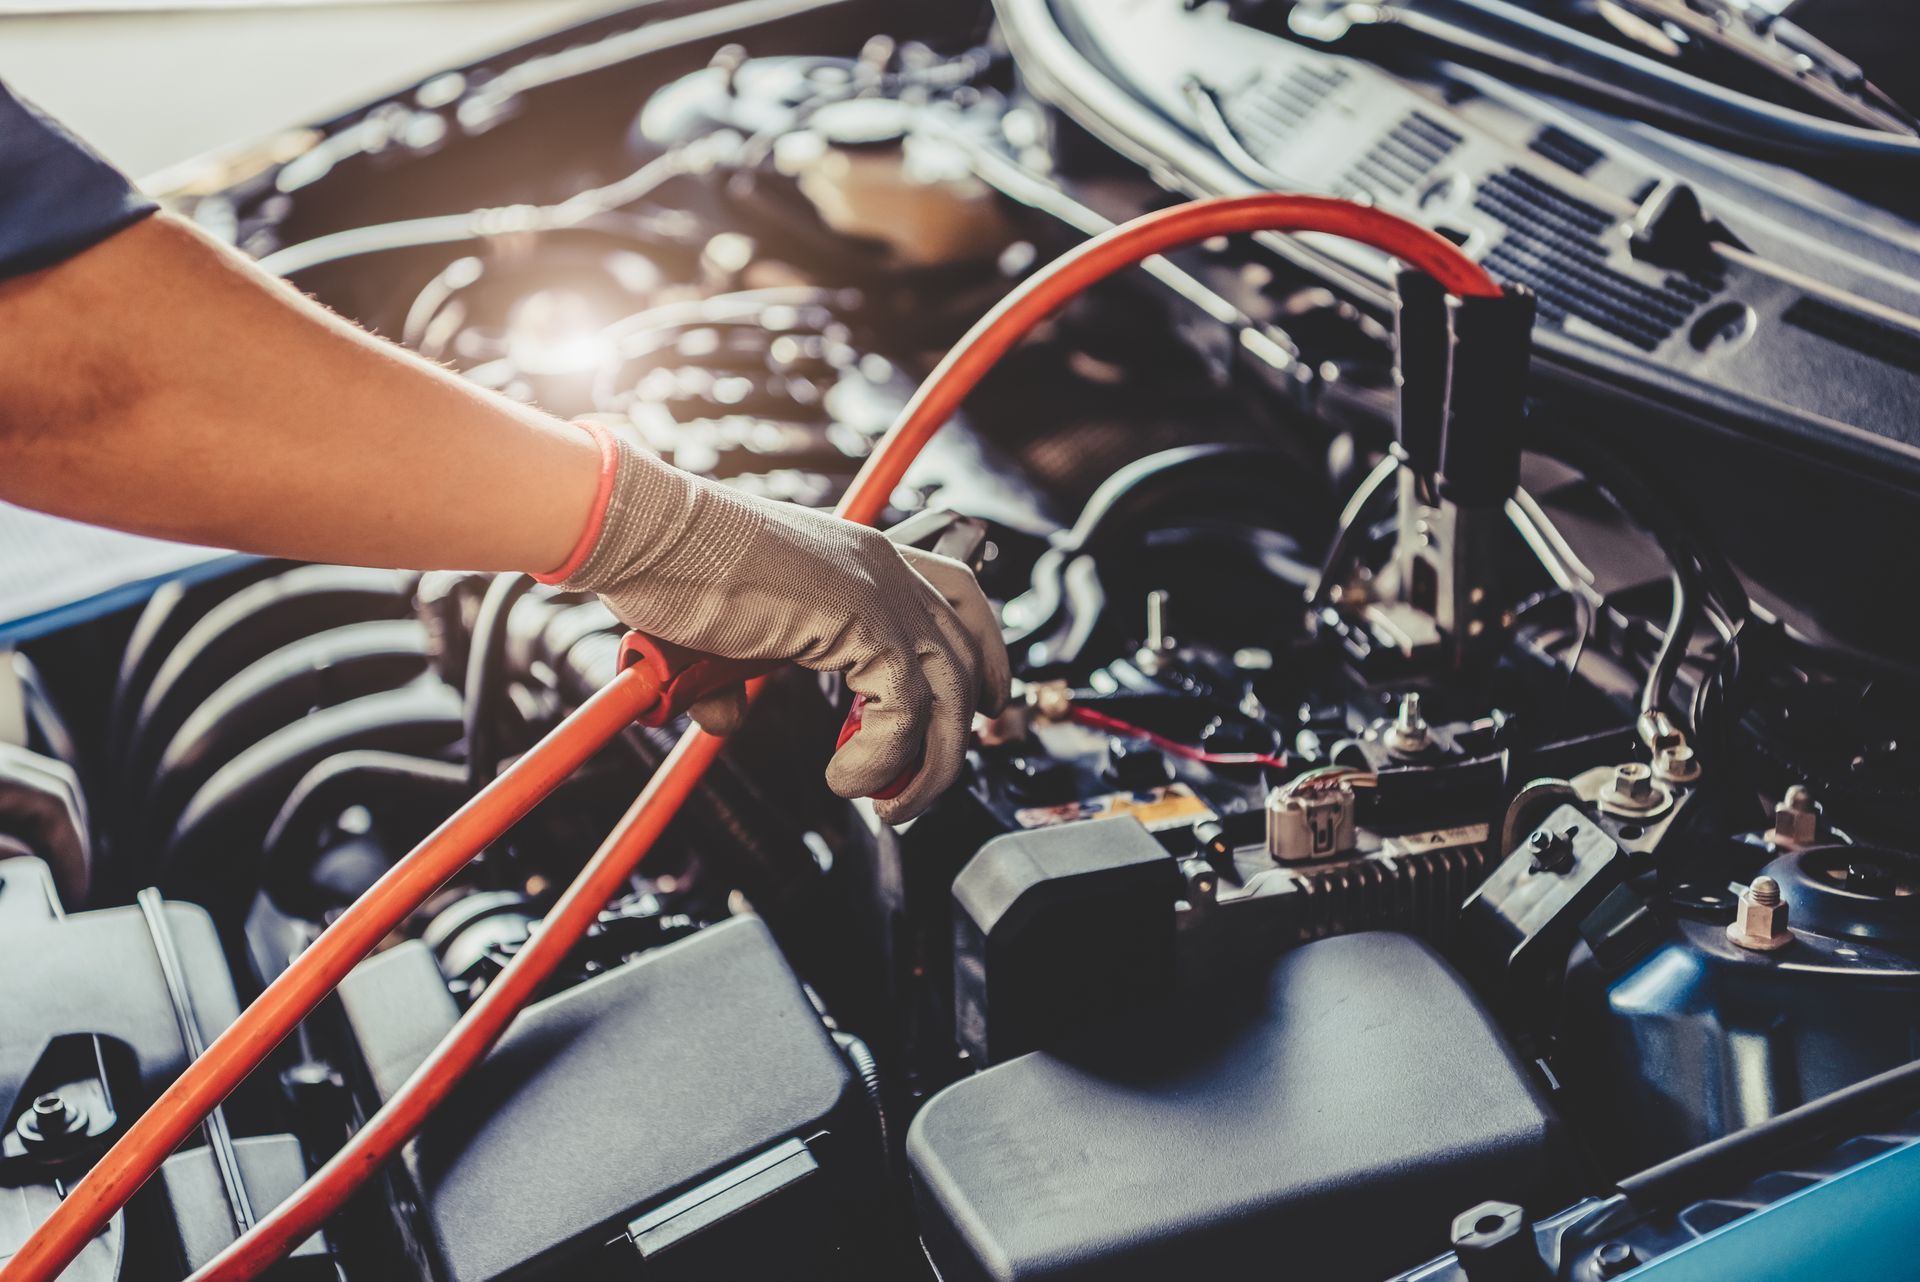 Jump Starting Your Car - Simple Step-by-Step Guide | Mike's Auto Service Center
